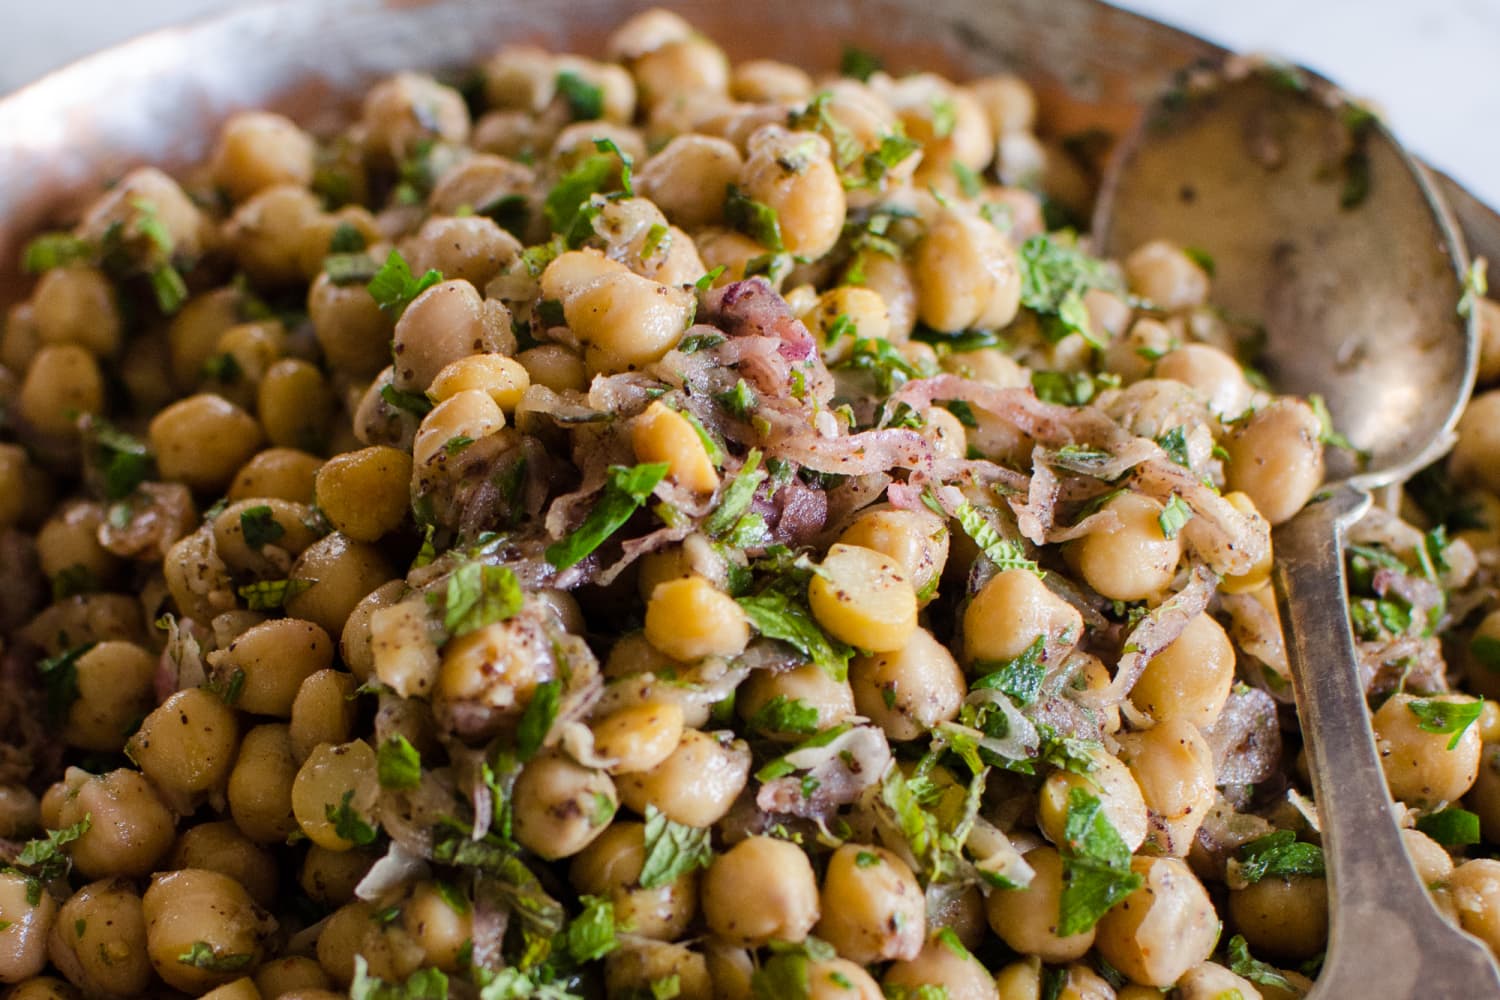 Recipe: Chickpea Salad with Red Onion, Sumac, and Lemon